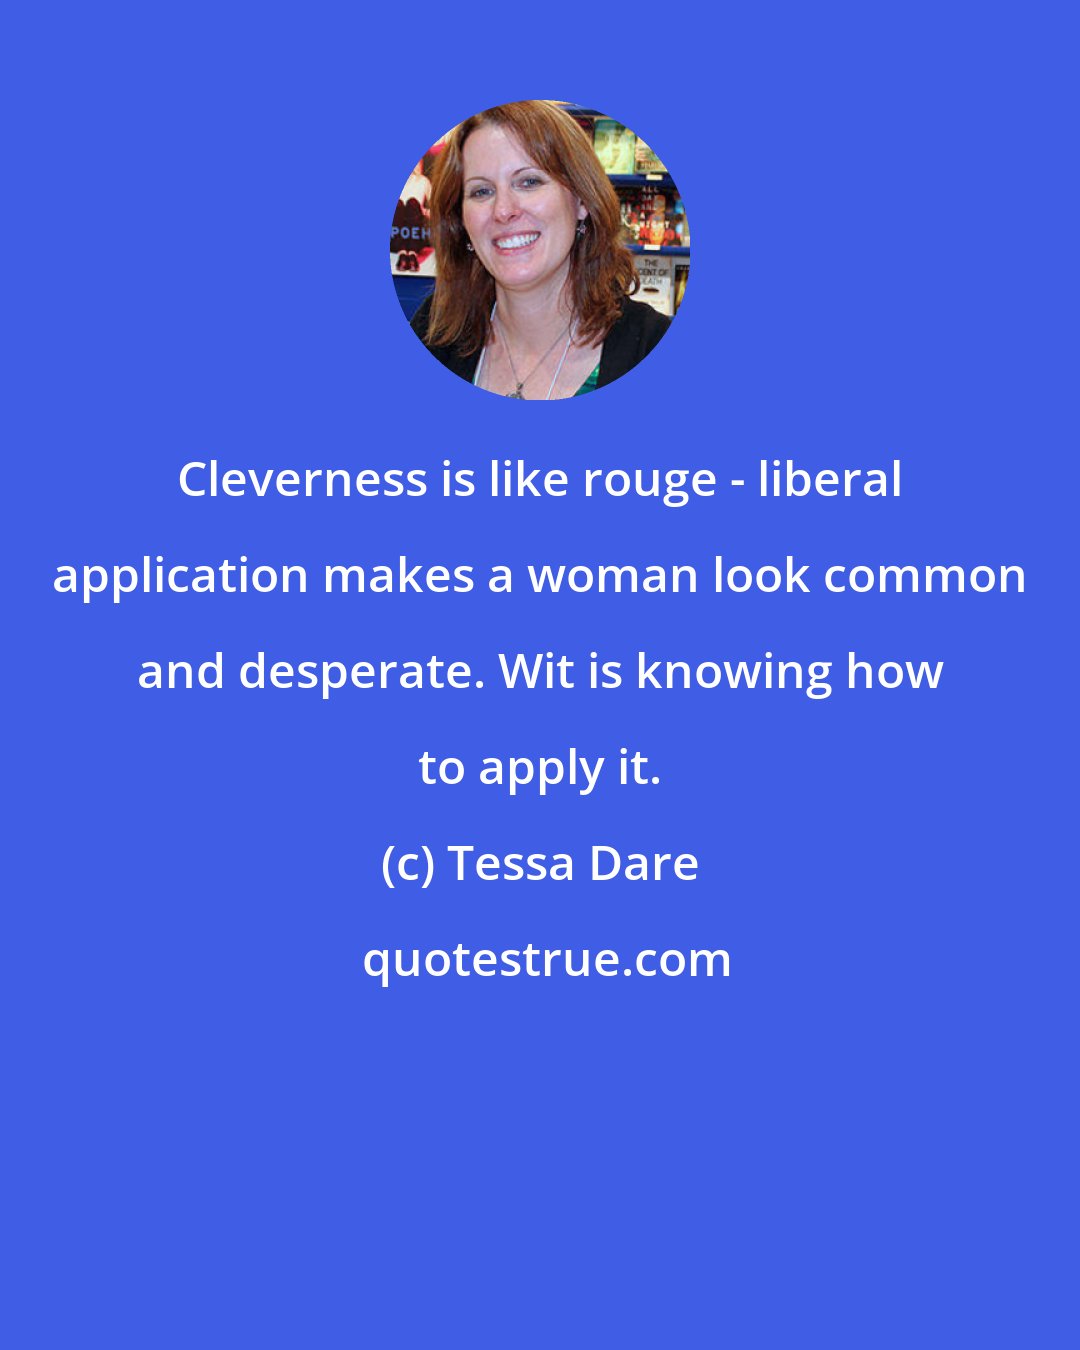 Tessa Dare: Cleverness is like rouge - liberal application makes a woman look common and desperate. Wit is knowing how to apply it.